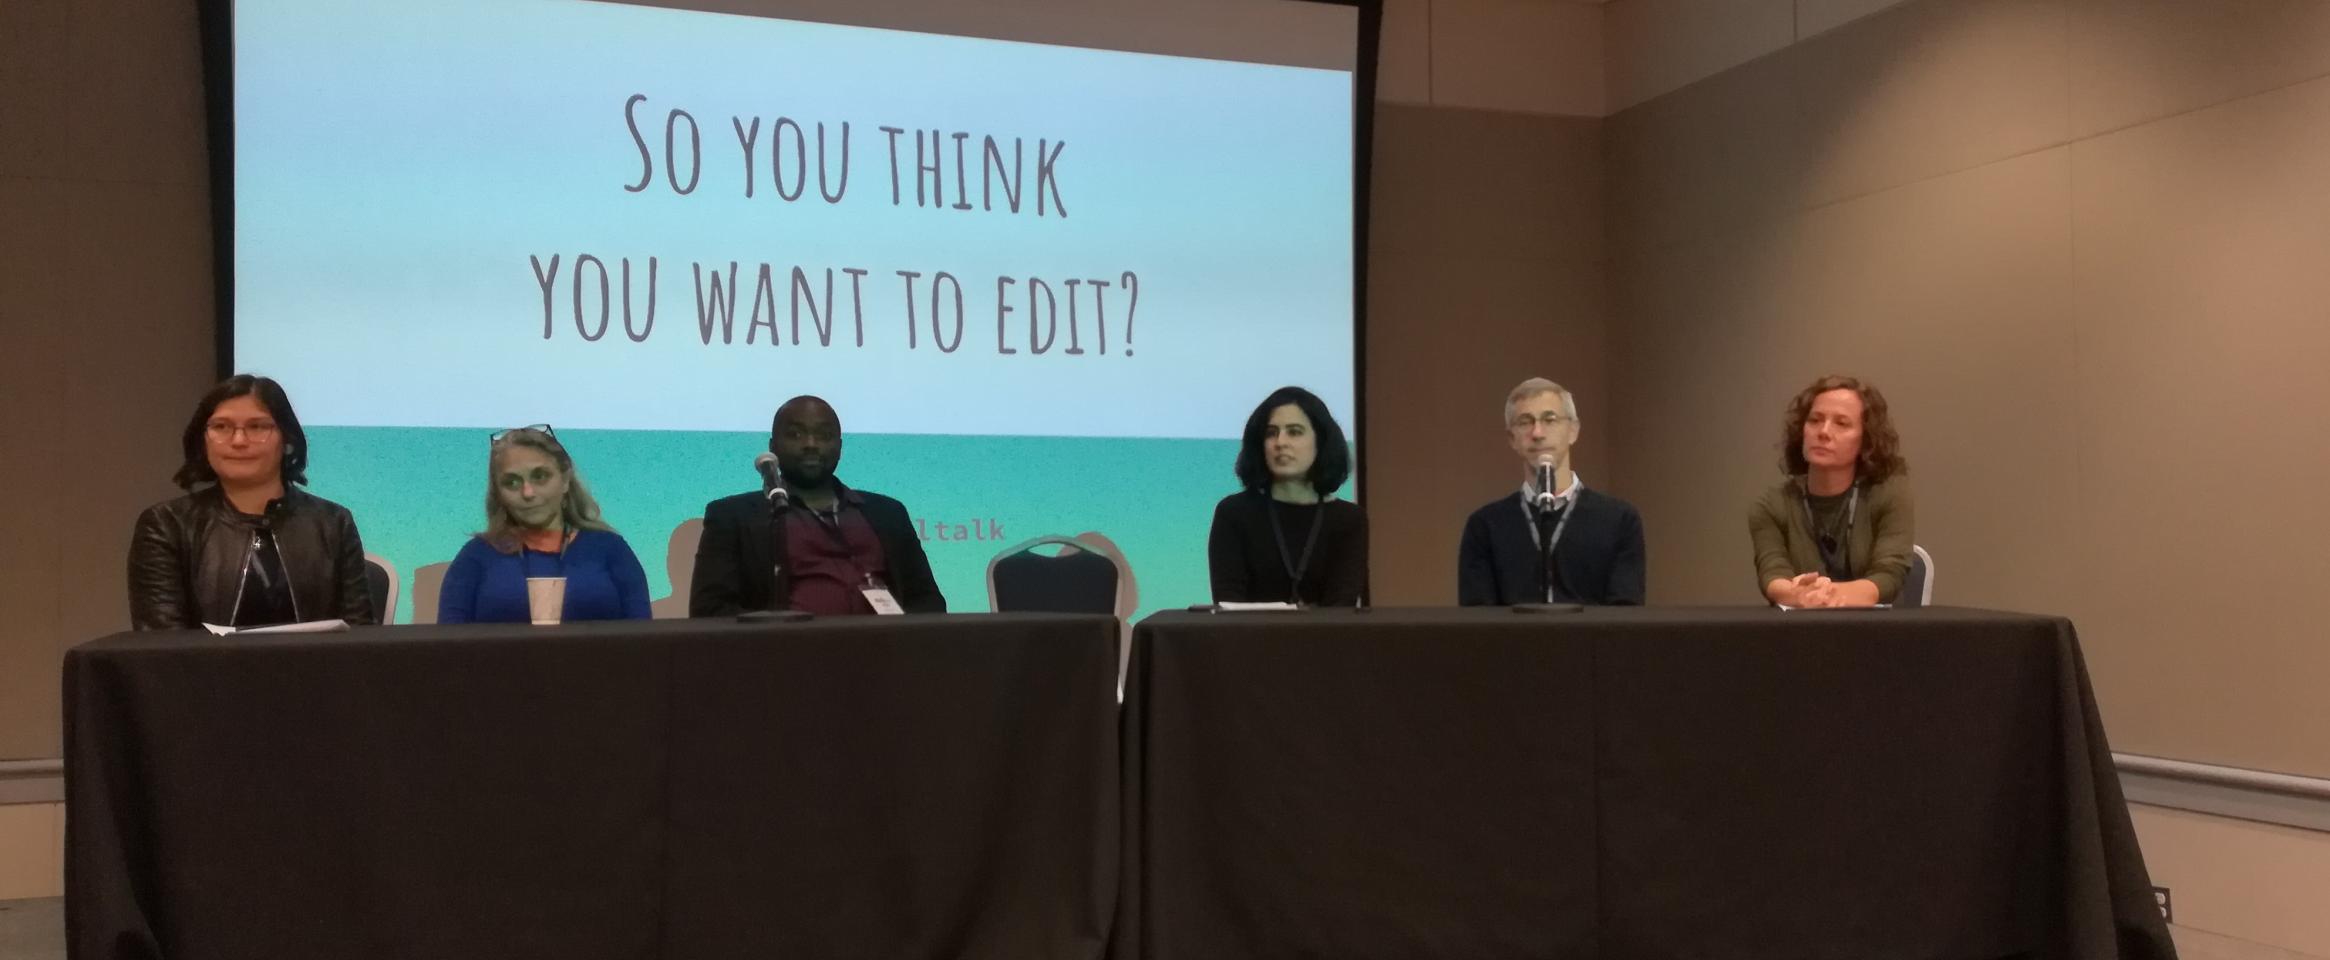 ScienceWriters 2018 panel: So you think you want to edit?